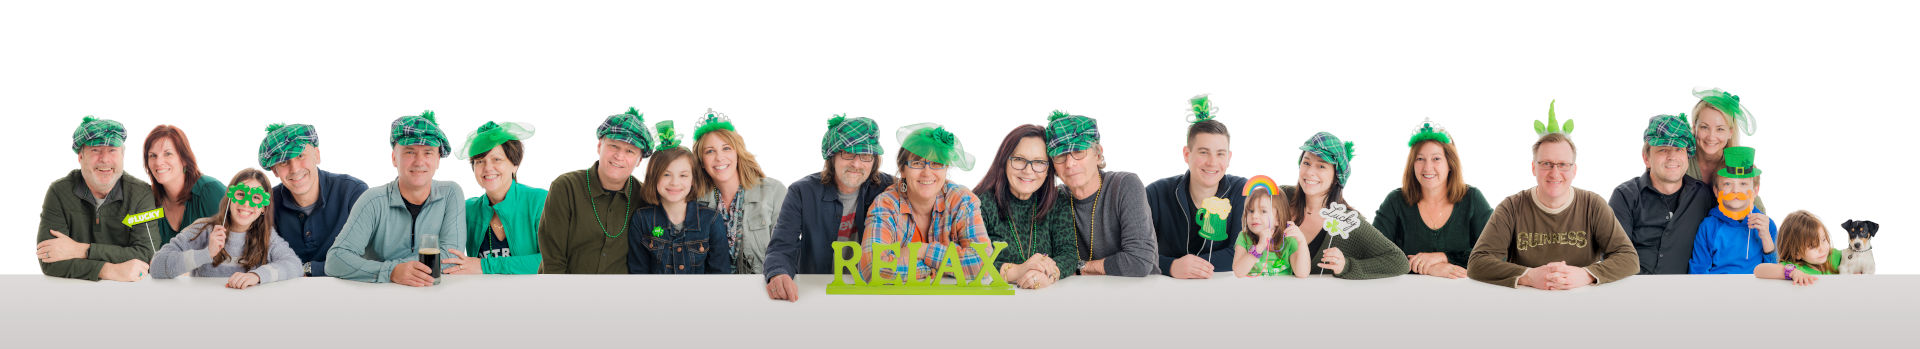 team family portrait of people wearing in st Patrick costumes